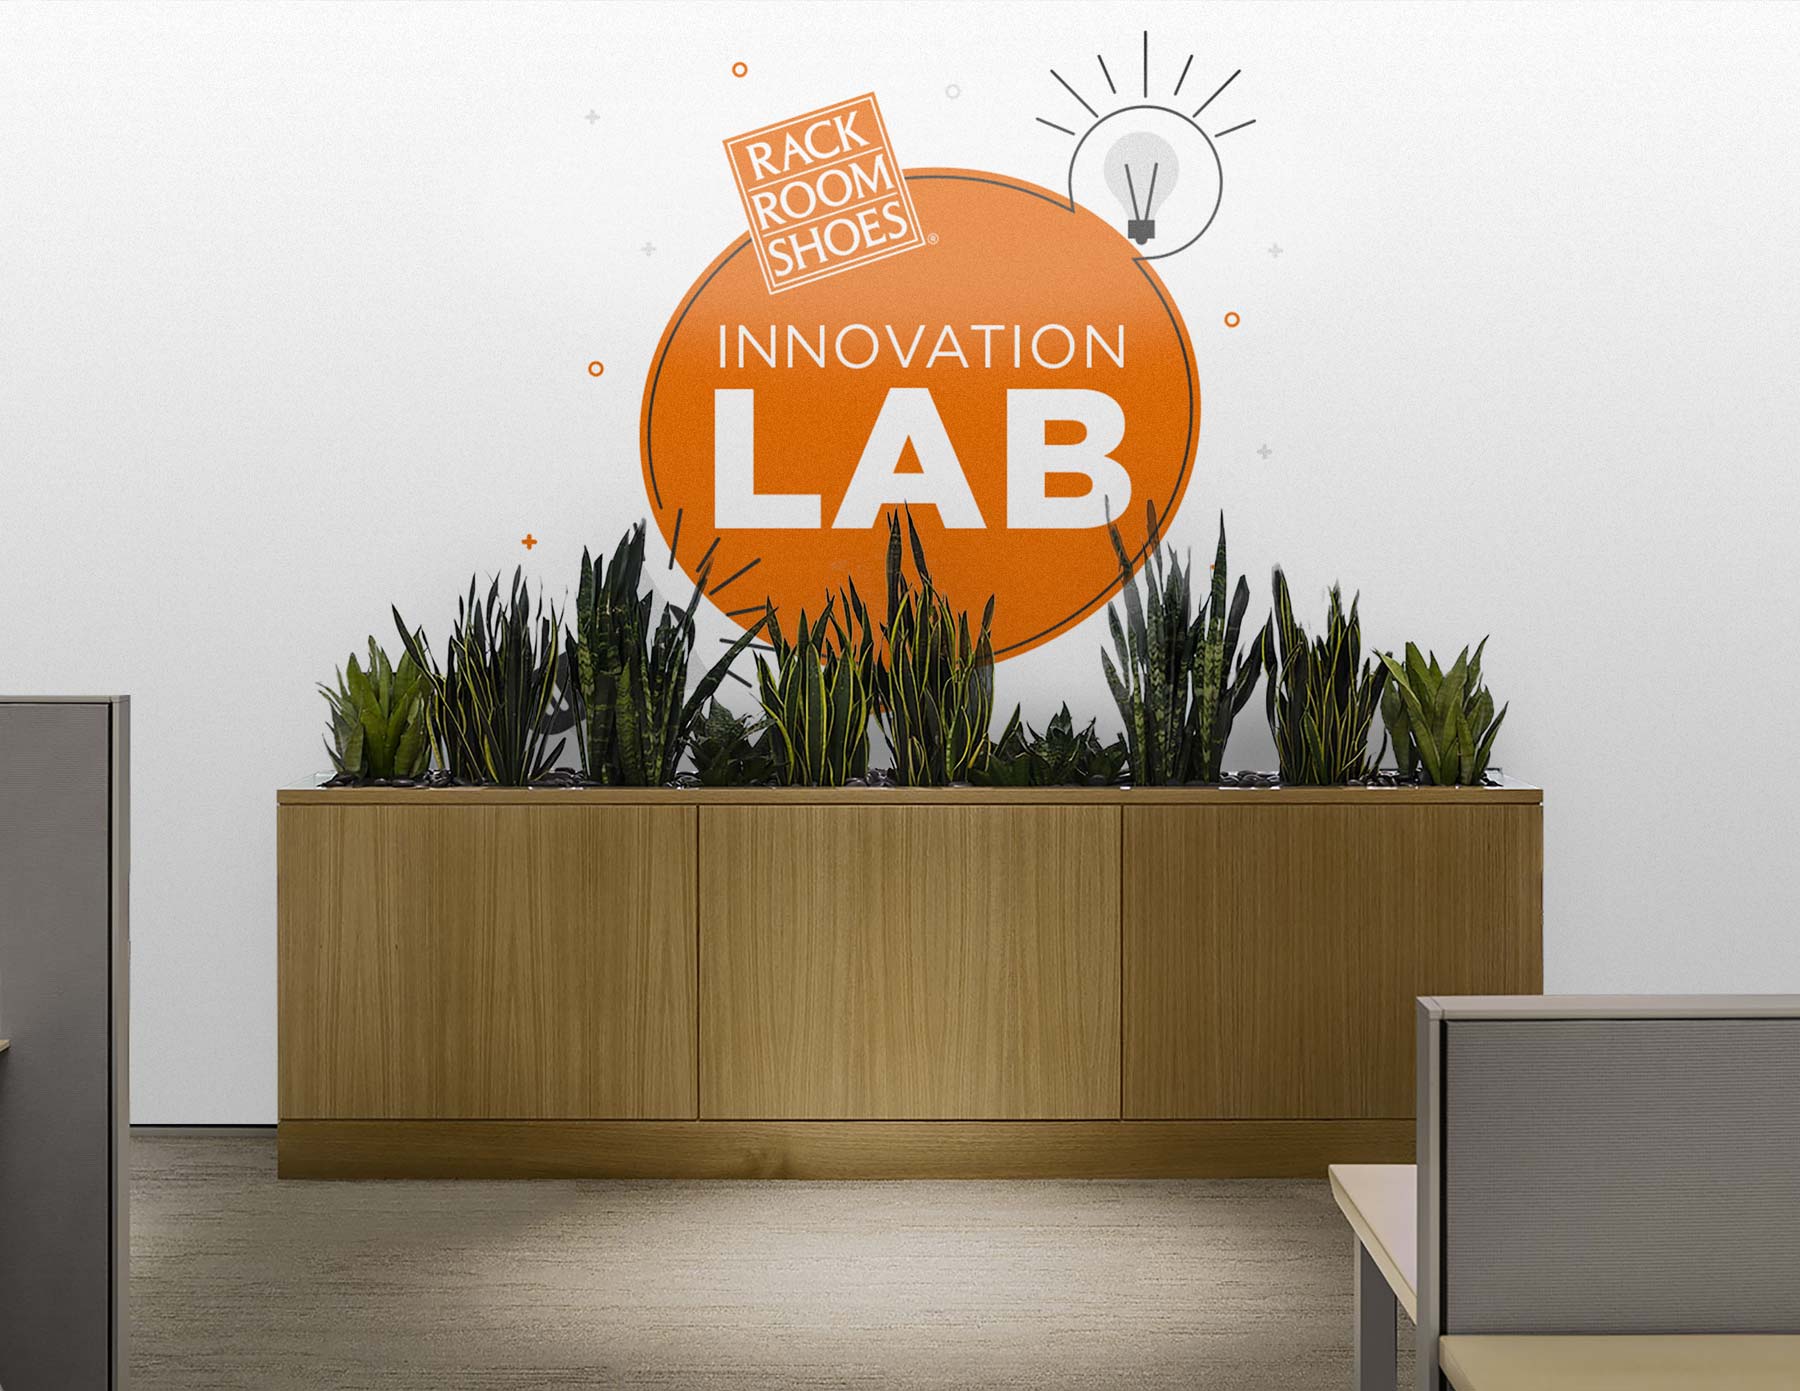 the innovation lab logo painted large on a wall with an office planet in front of it